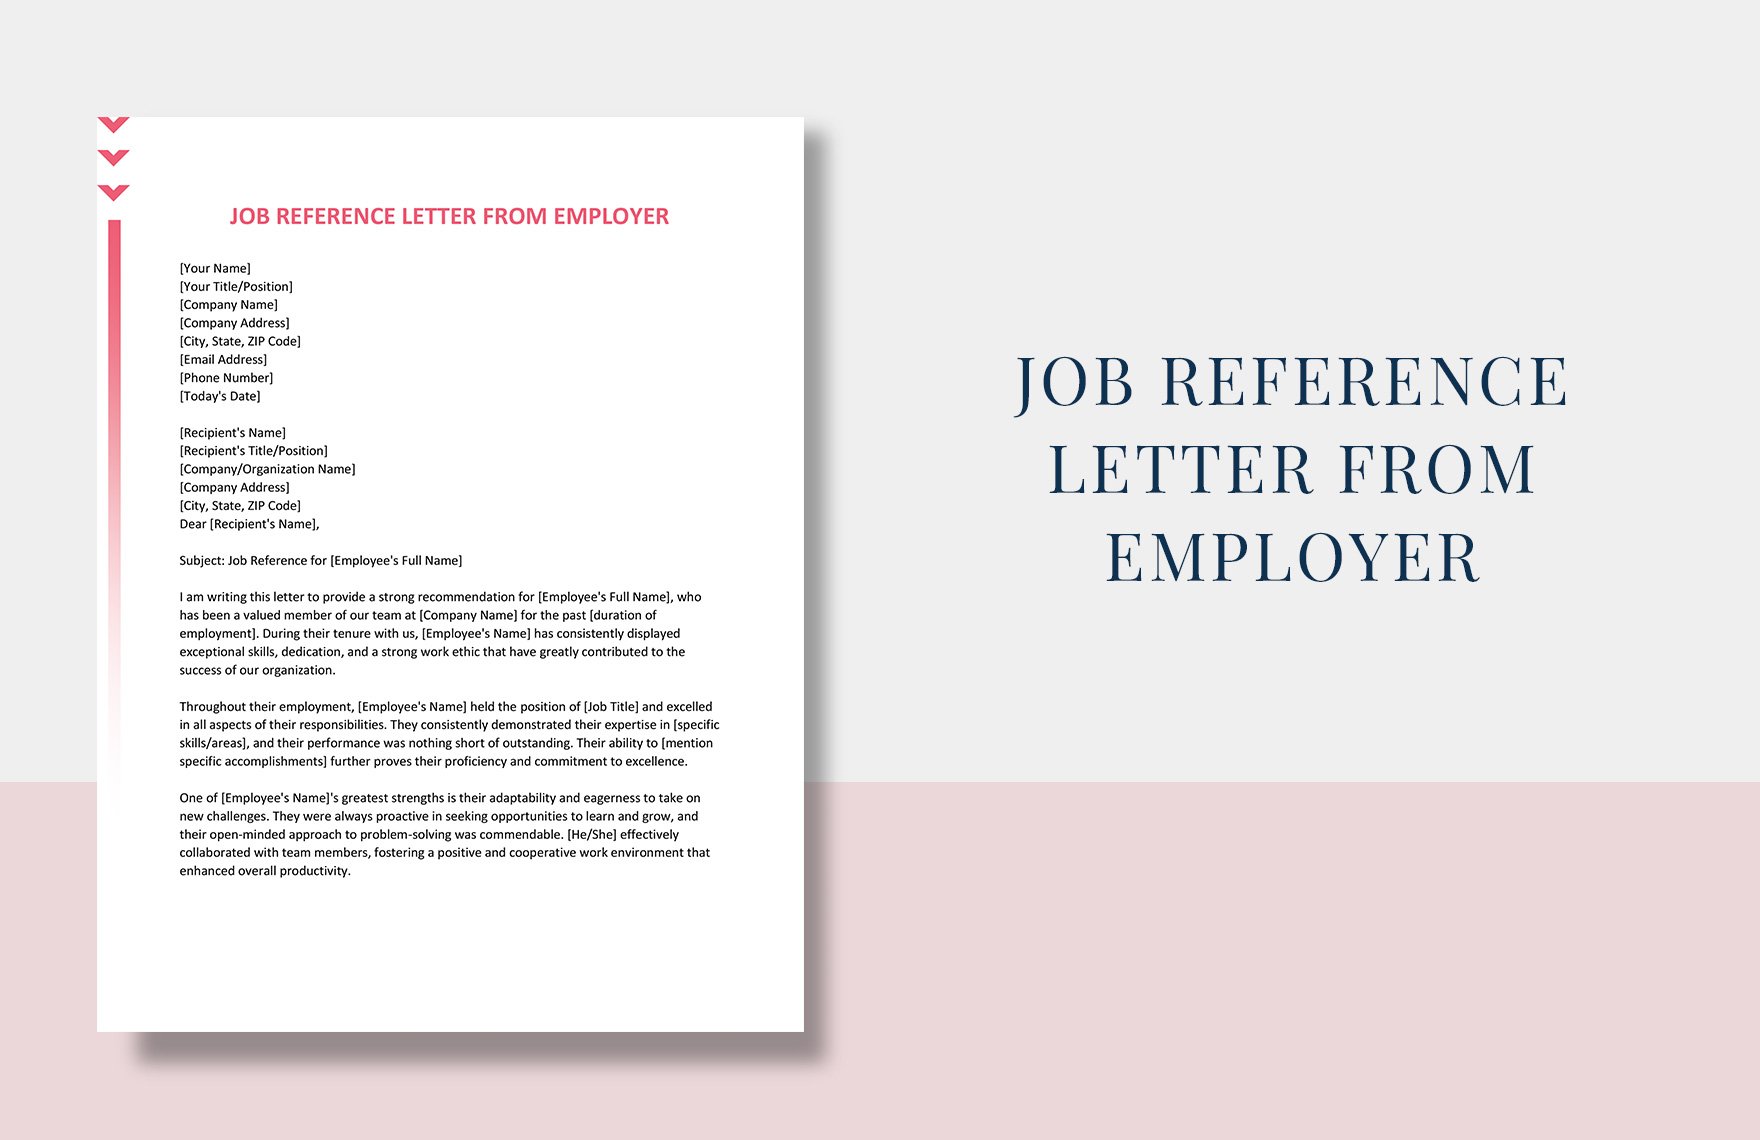 Free Job Reference Letter From Employer in Google Docs, Apple Pages, Adobe XD